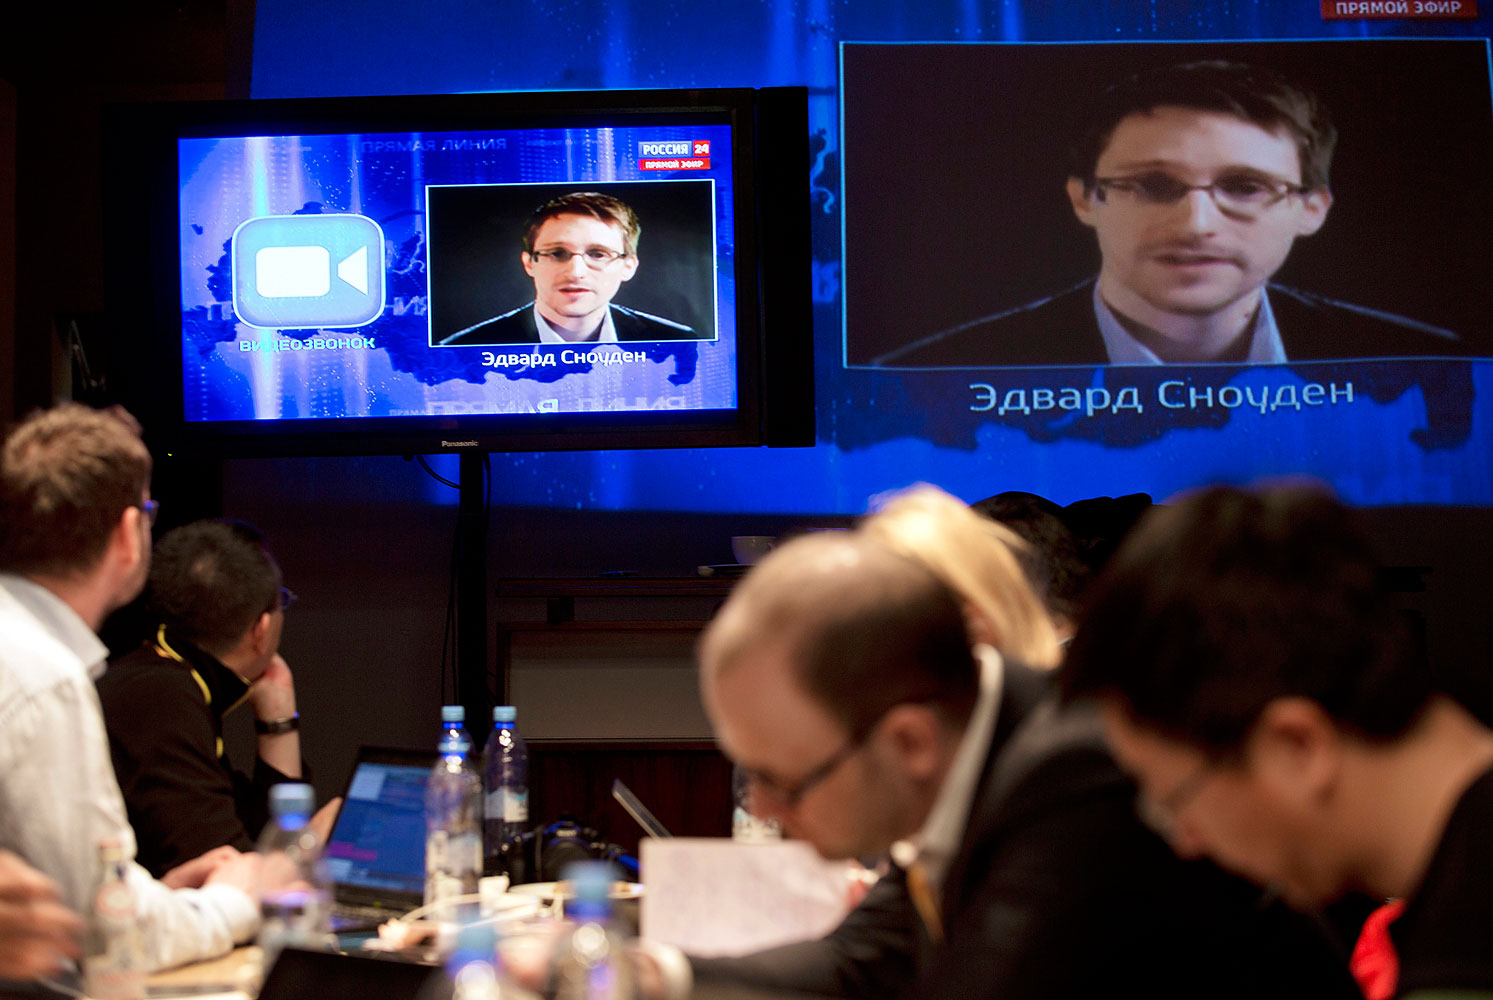 Edward Snowden, displayed on television screens, asks a question to Russian President Vladimir Putin during a nationally televised question-and-answer session, in Moscow, Thursday, April 17, 2014.